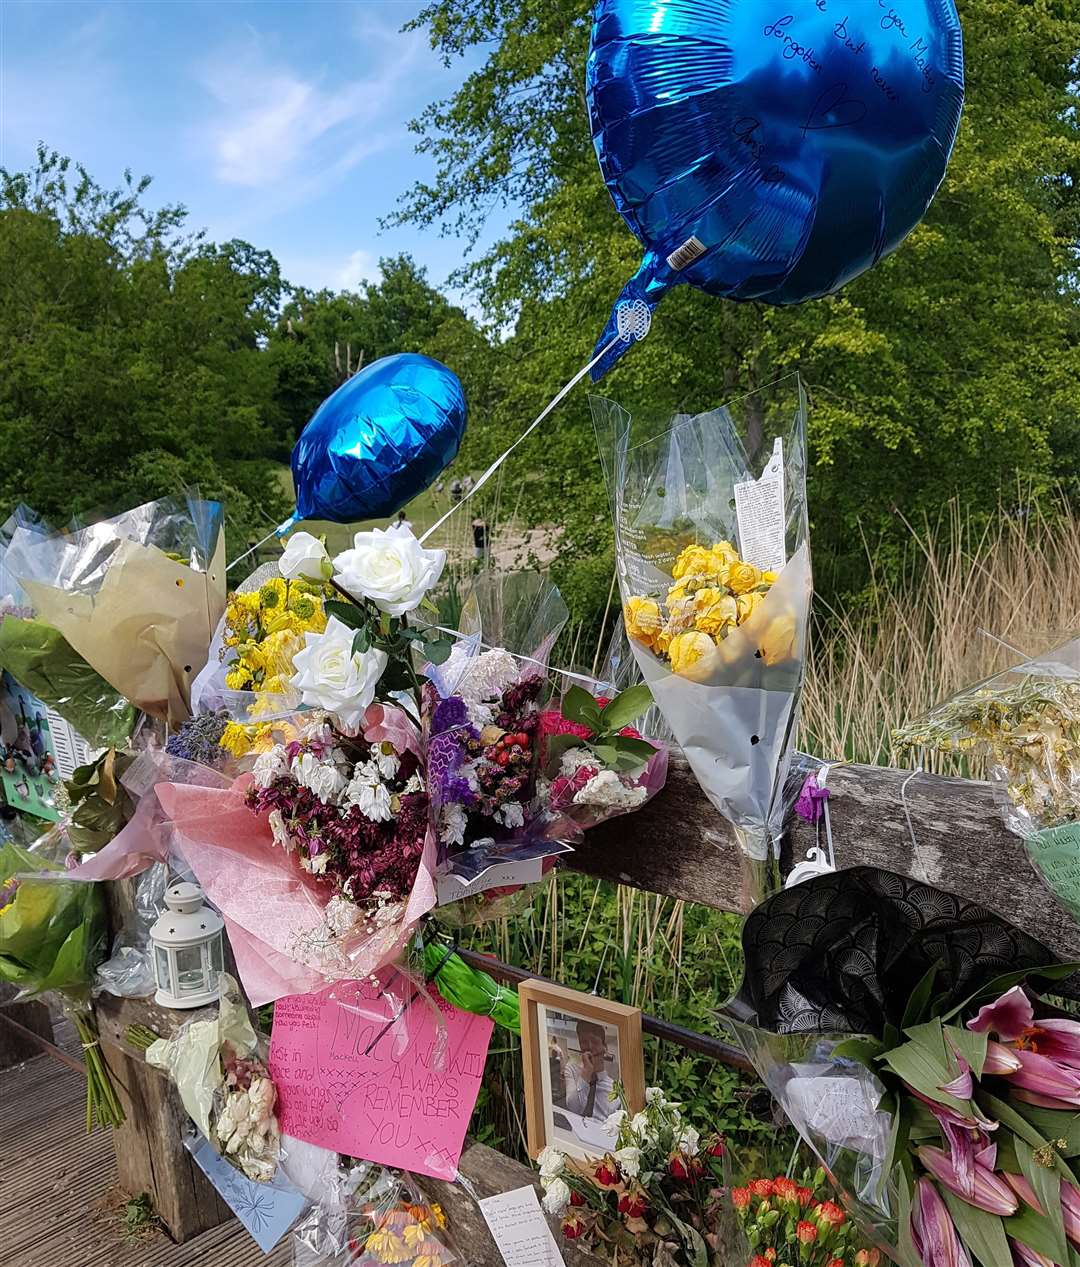 Floral tributes were left in Matthew's memory at Dunorlan Park